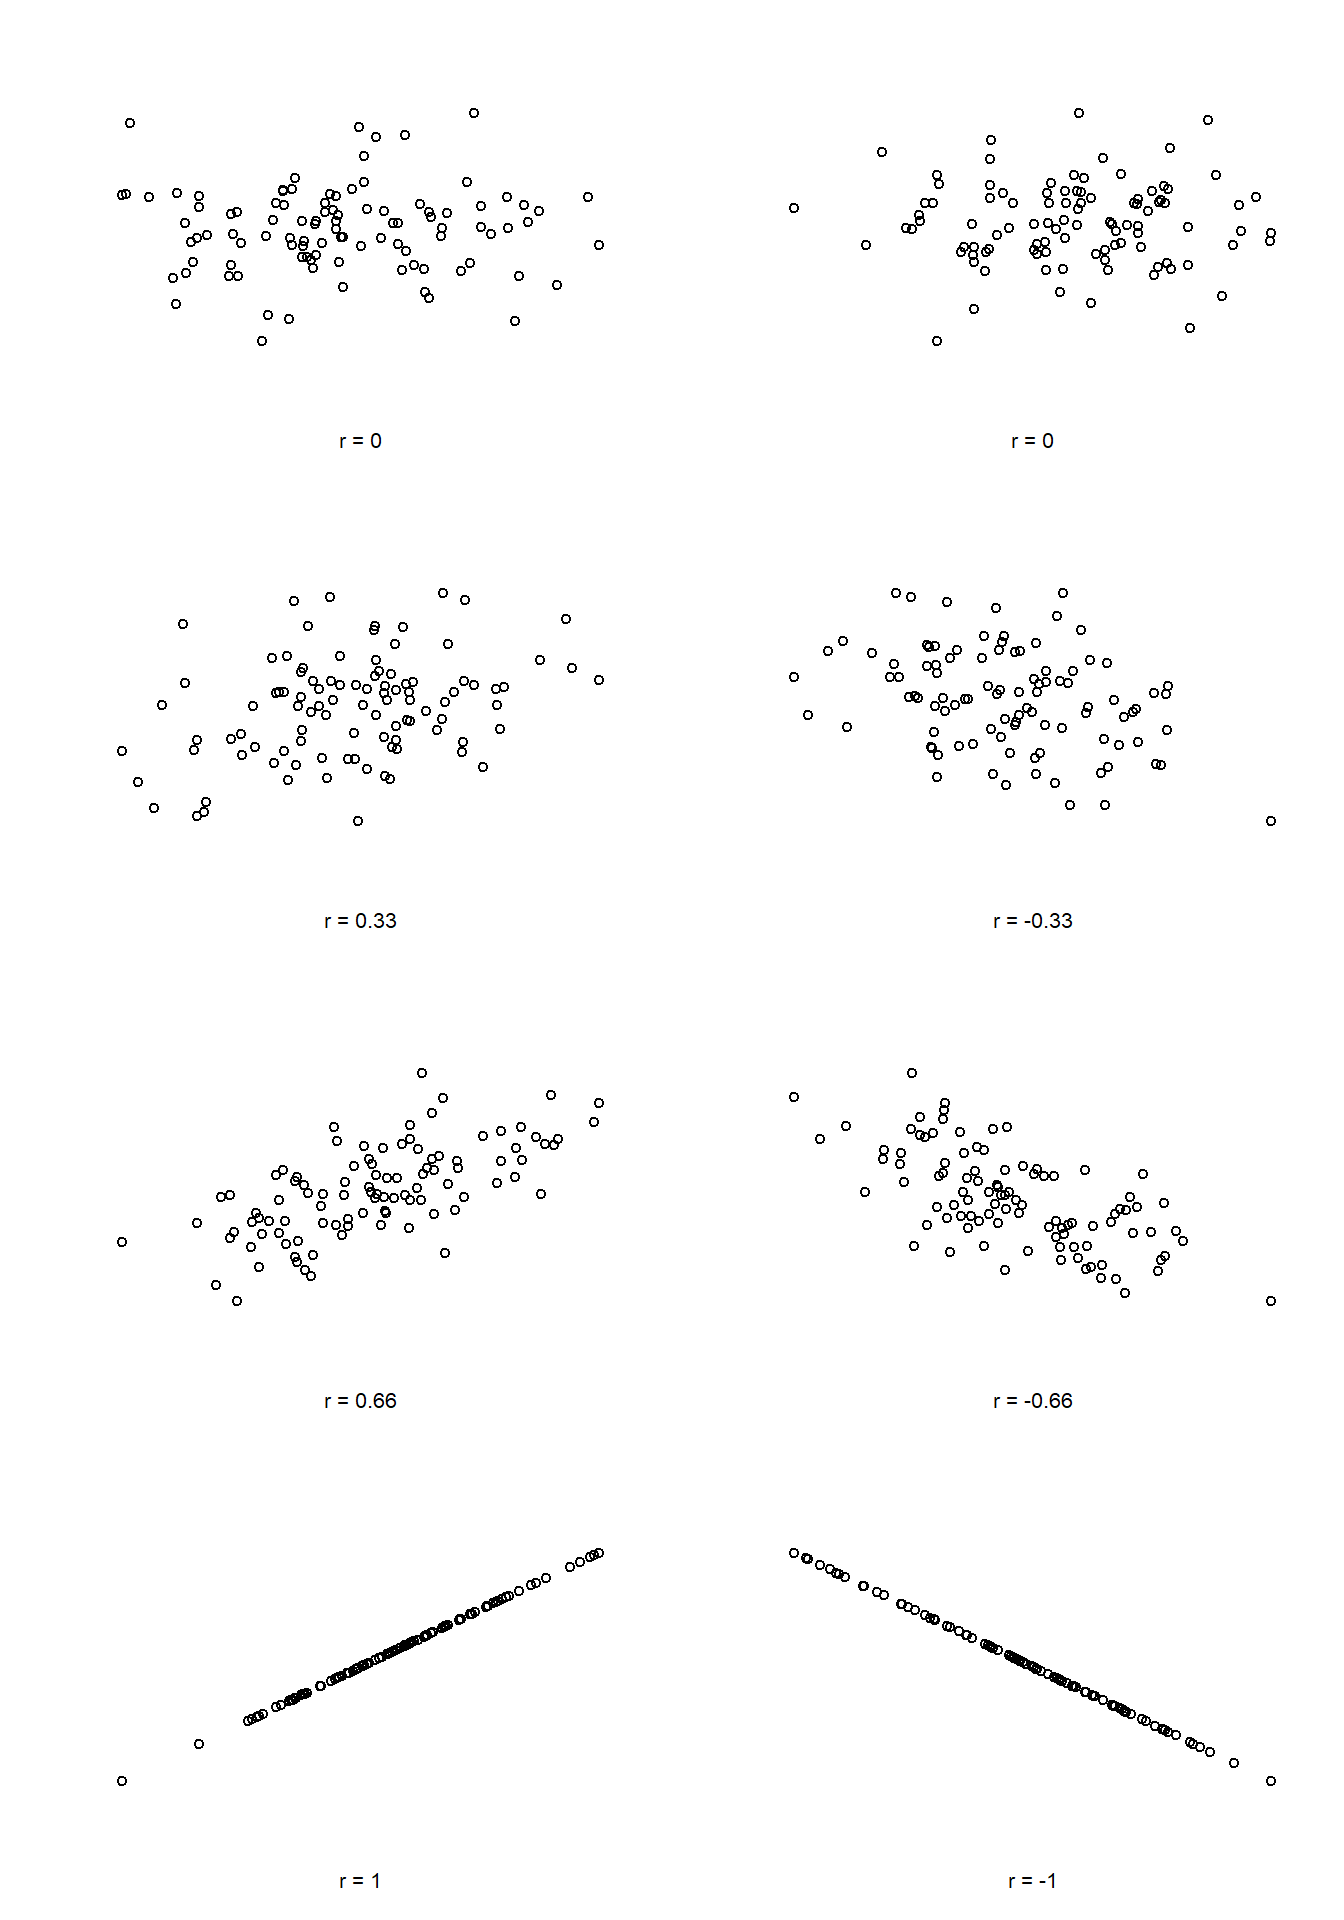 Illustration of the effect of varying the strength and direction of a correlation